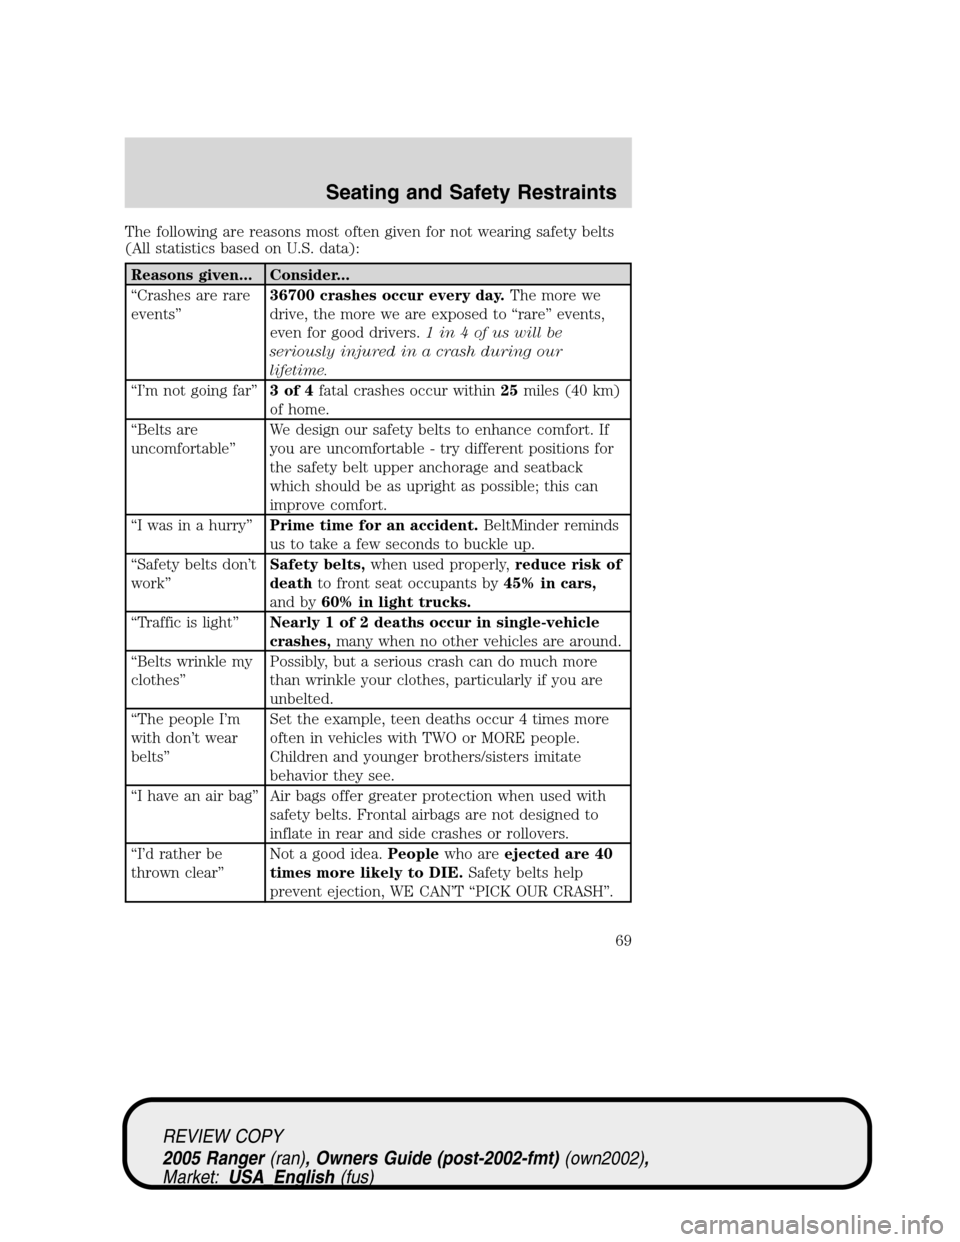 FORD RANGER 2005 2.G Repair Manual The following are reasons most often given for not wearing safety belts
(All statistics based on U.S. data):
Reasons given... Consider...
“Crashes are rare
events”36700 crashes occur every day.The